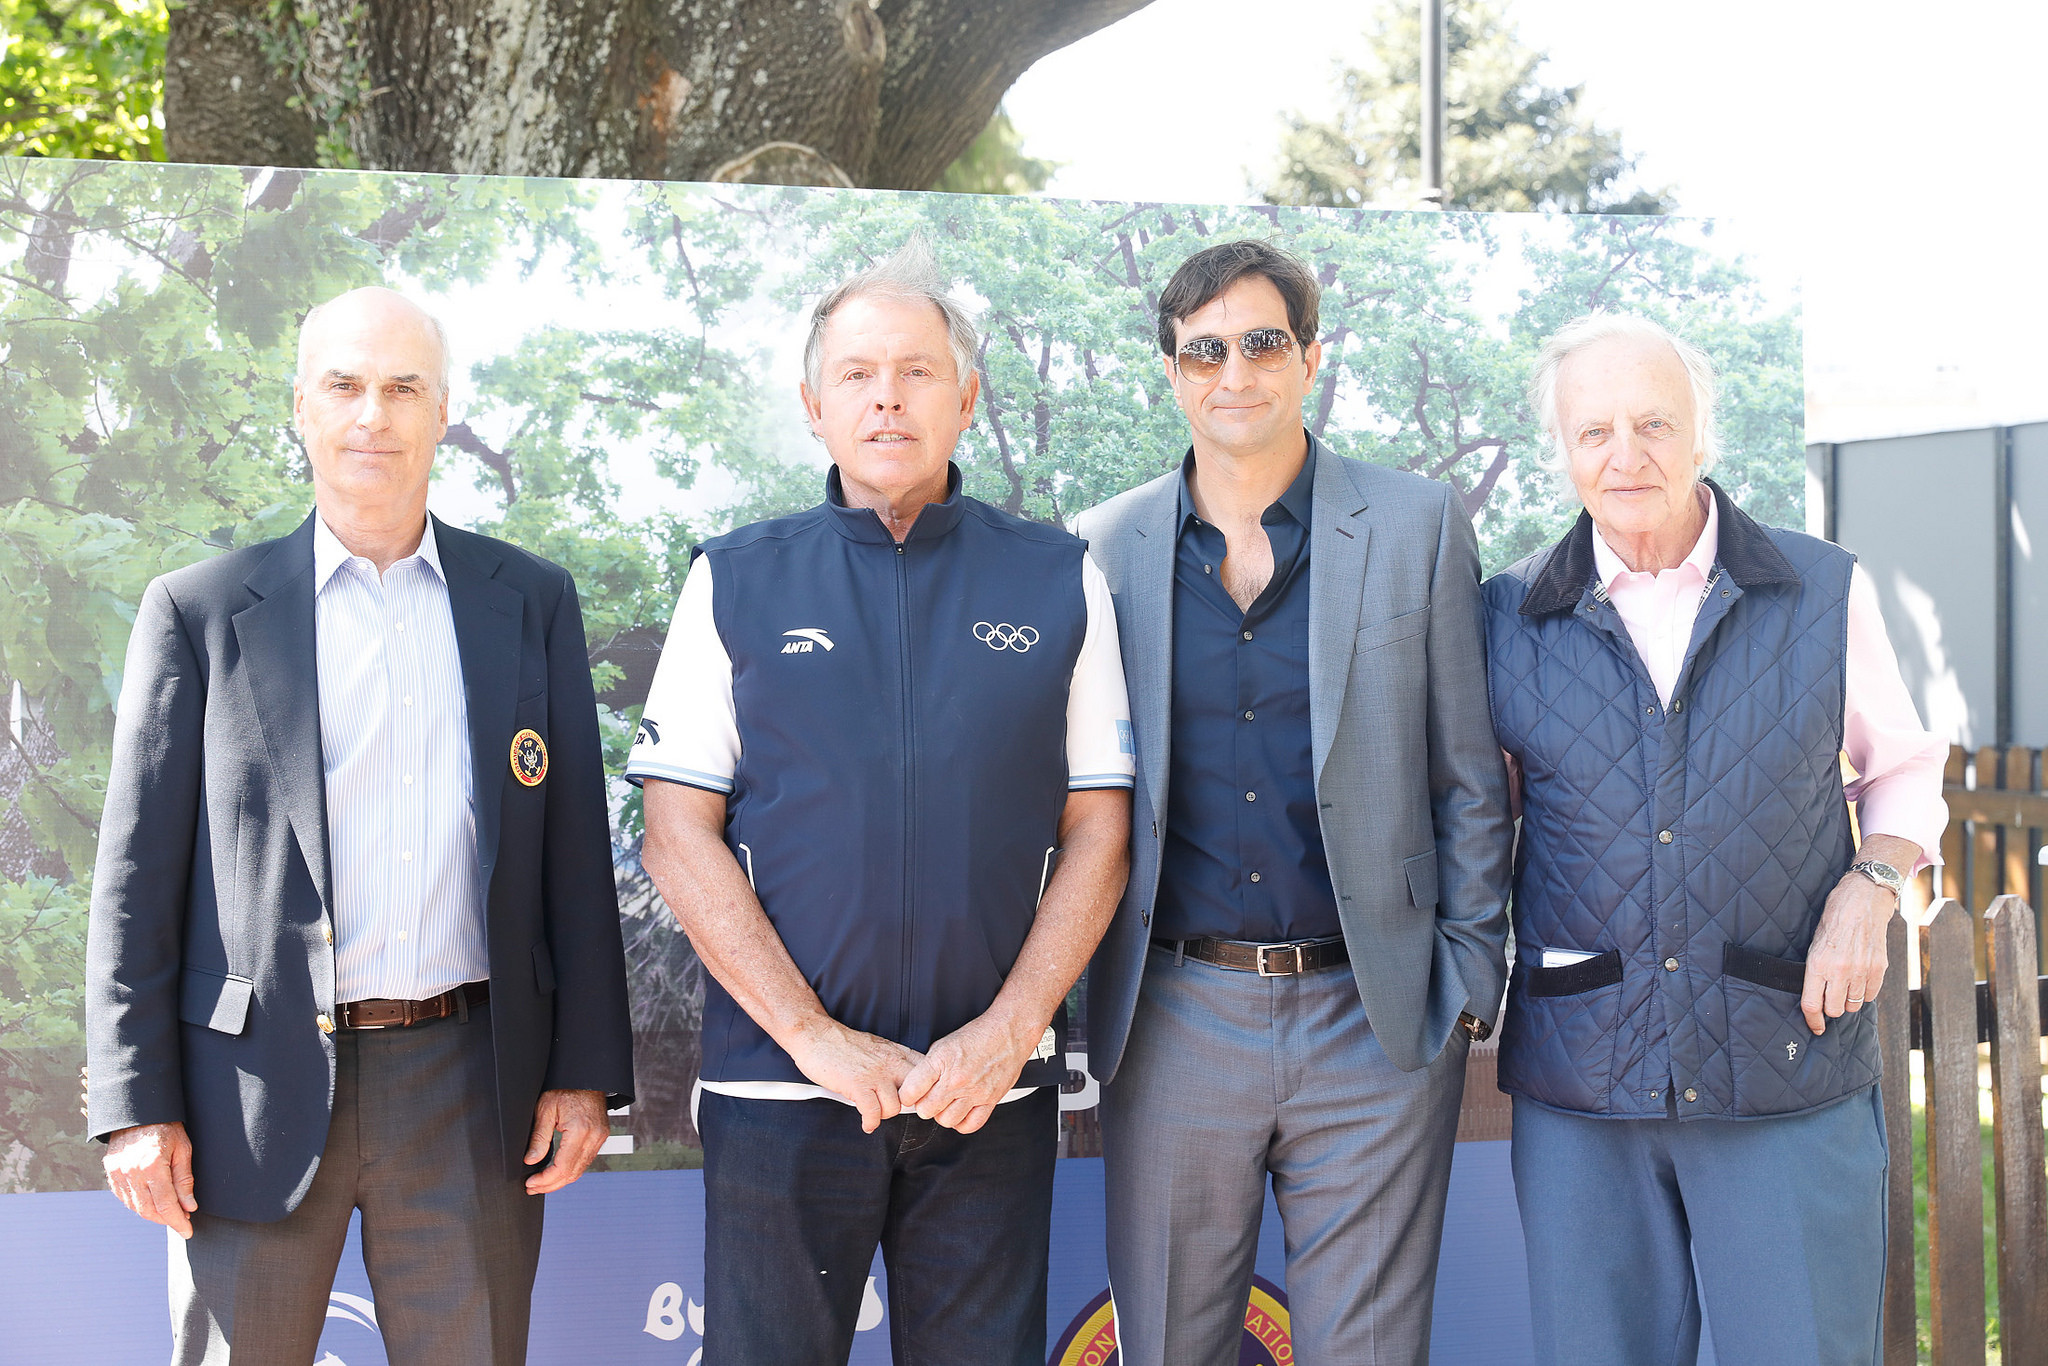 IOC member and Buenos Aires 2018 President Gerardo Werthein was among the attendees at the polo showcase ©Buenos Aires 2018